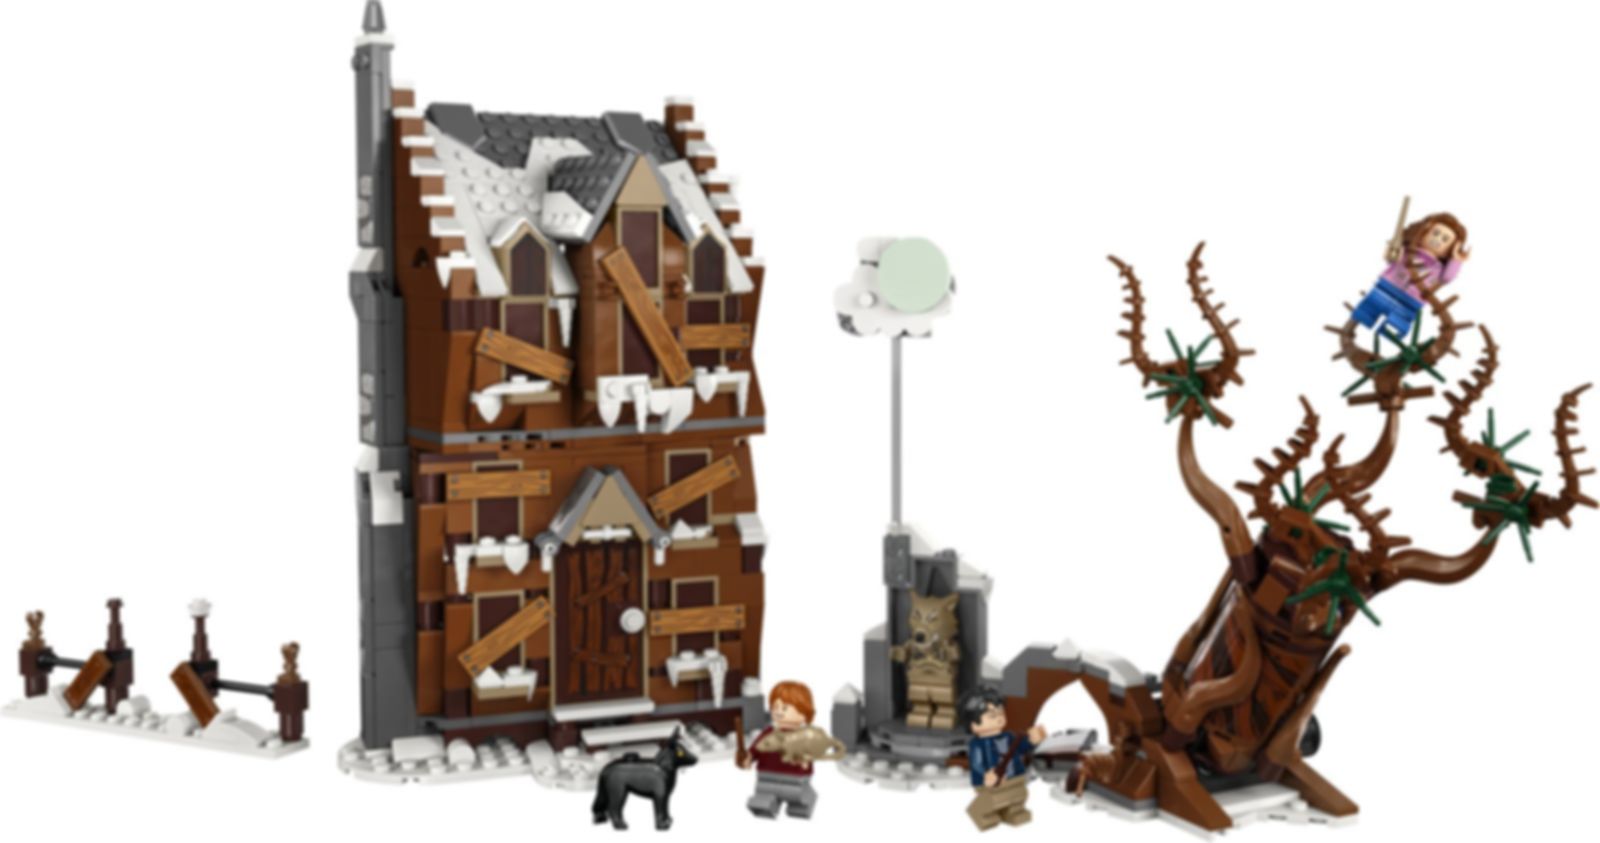 LEGO® Harry Potter™ The Shrieking Shack & Whomping Willow™ components